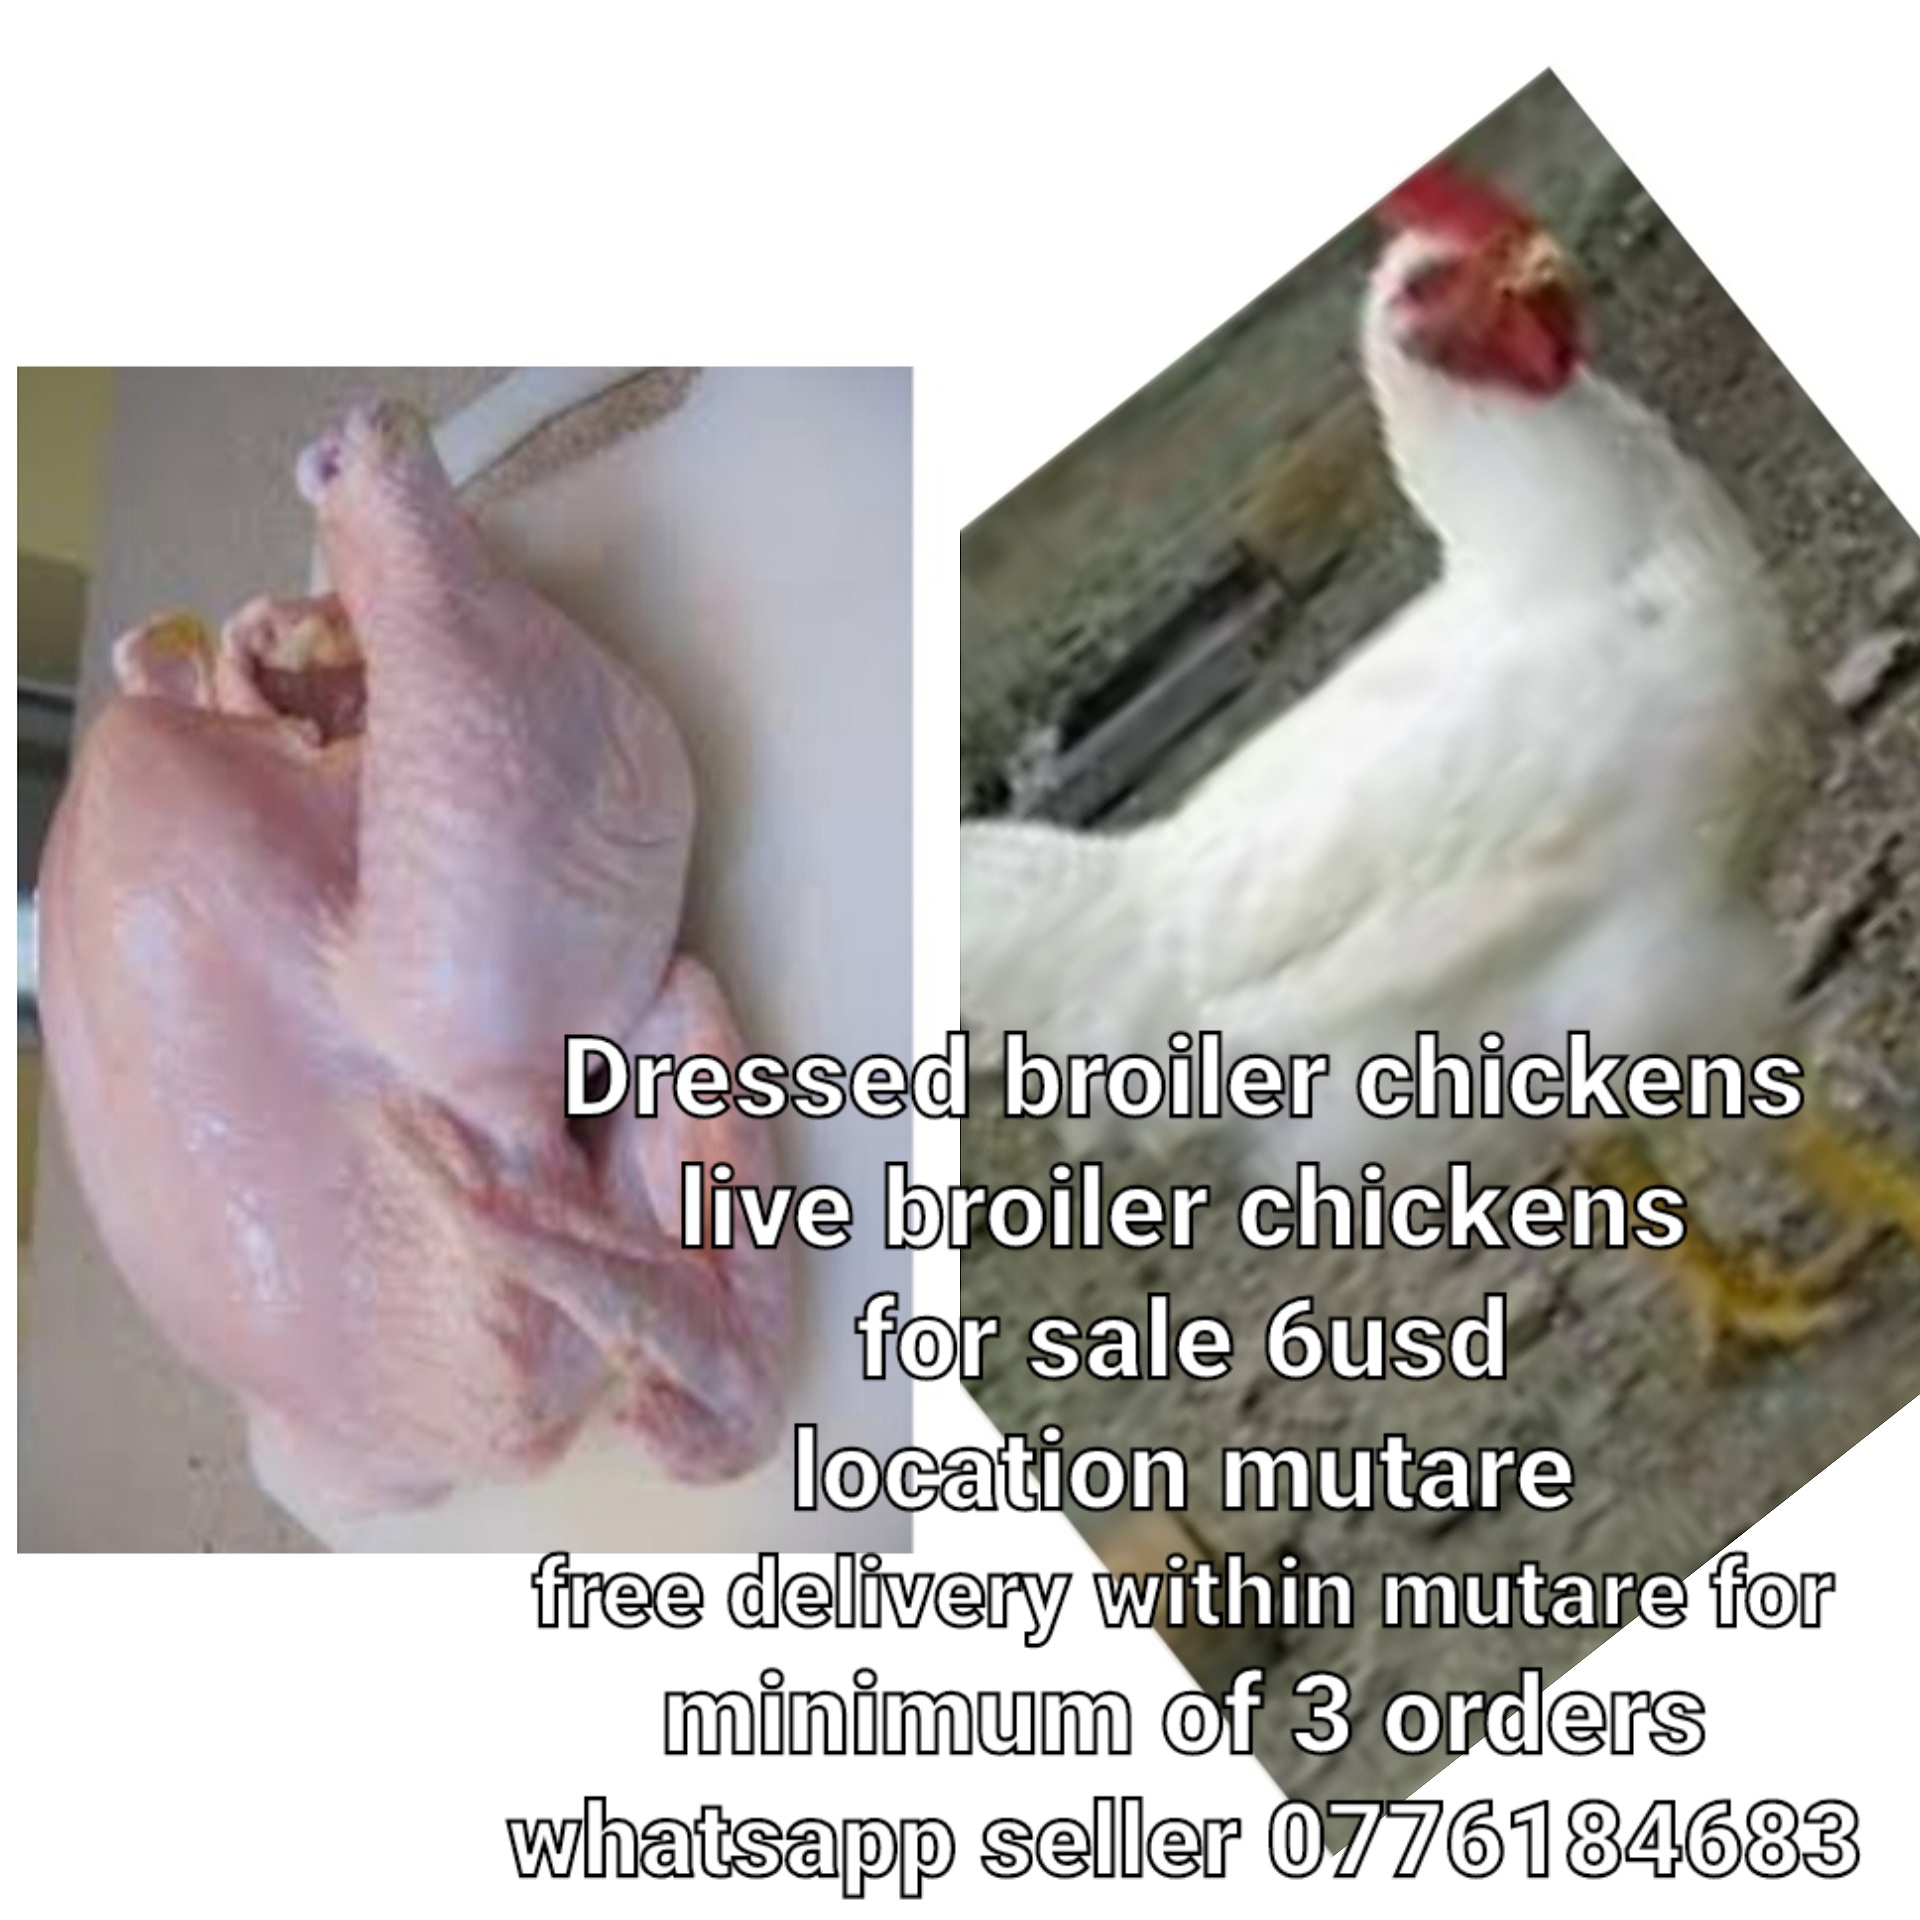 Live and dressed broiler chicken